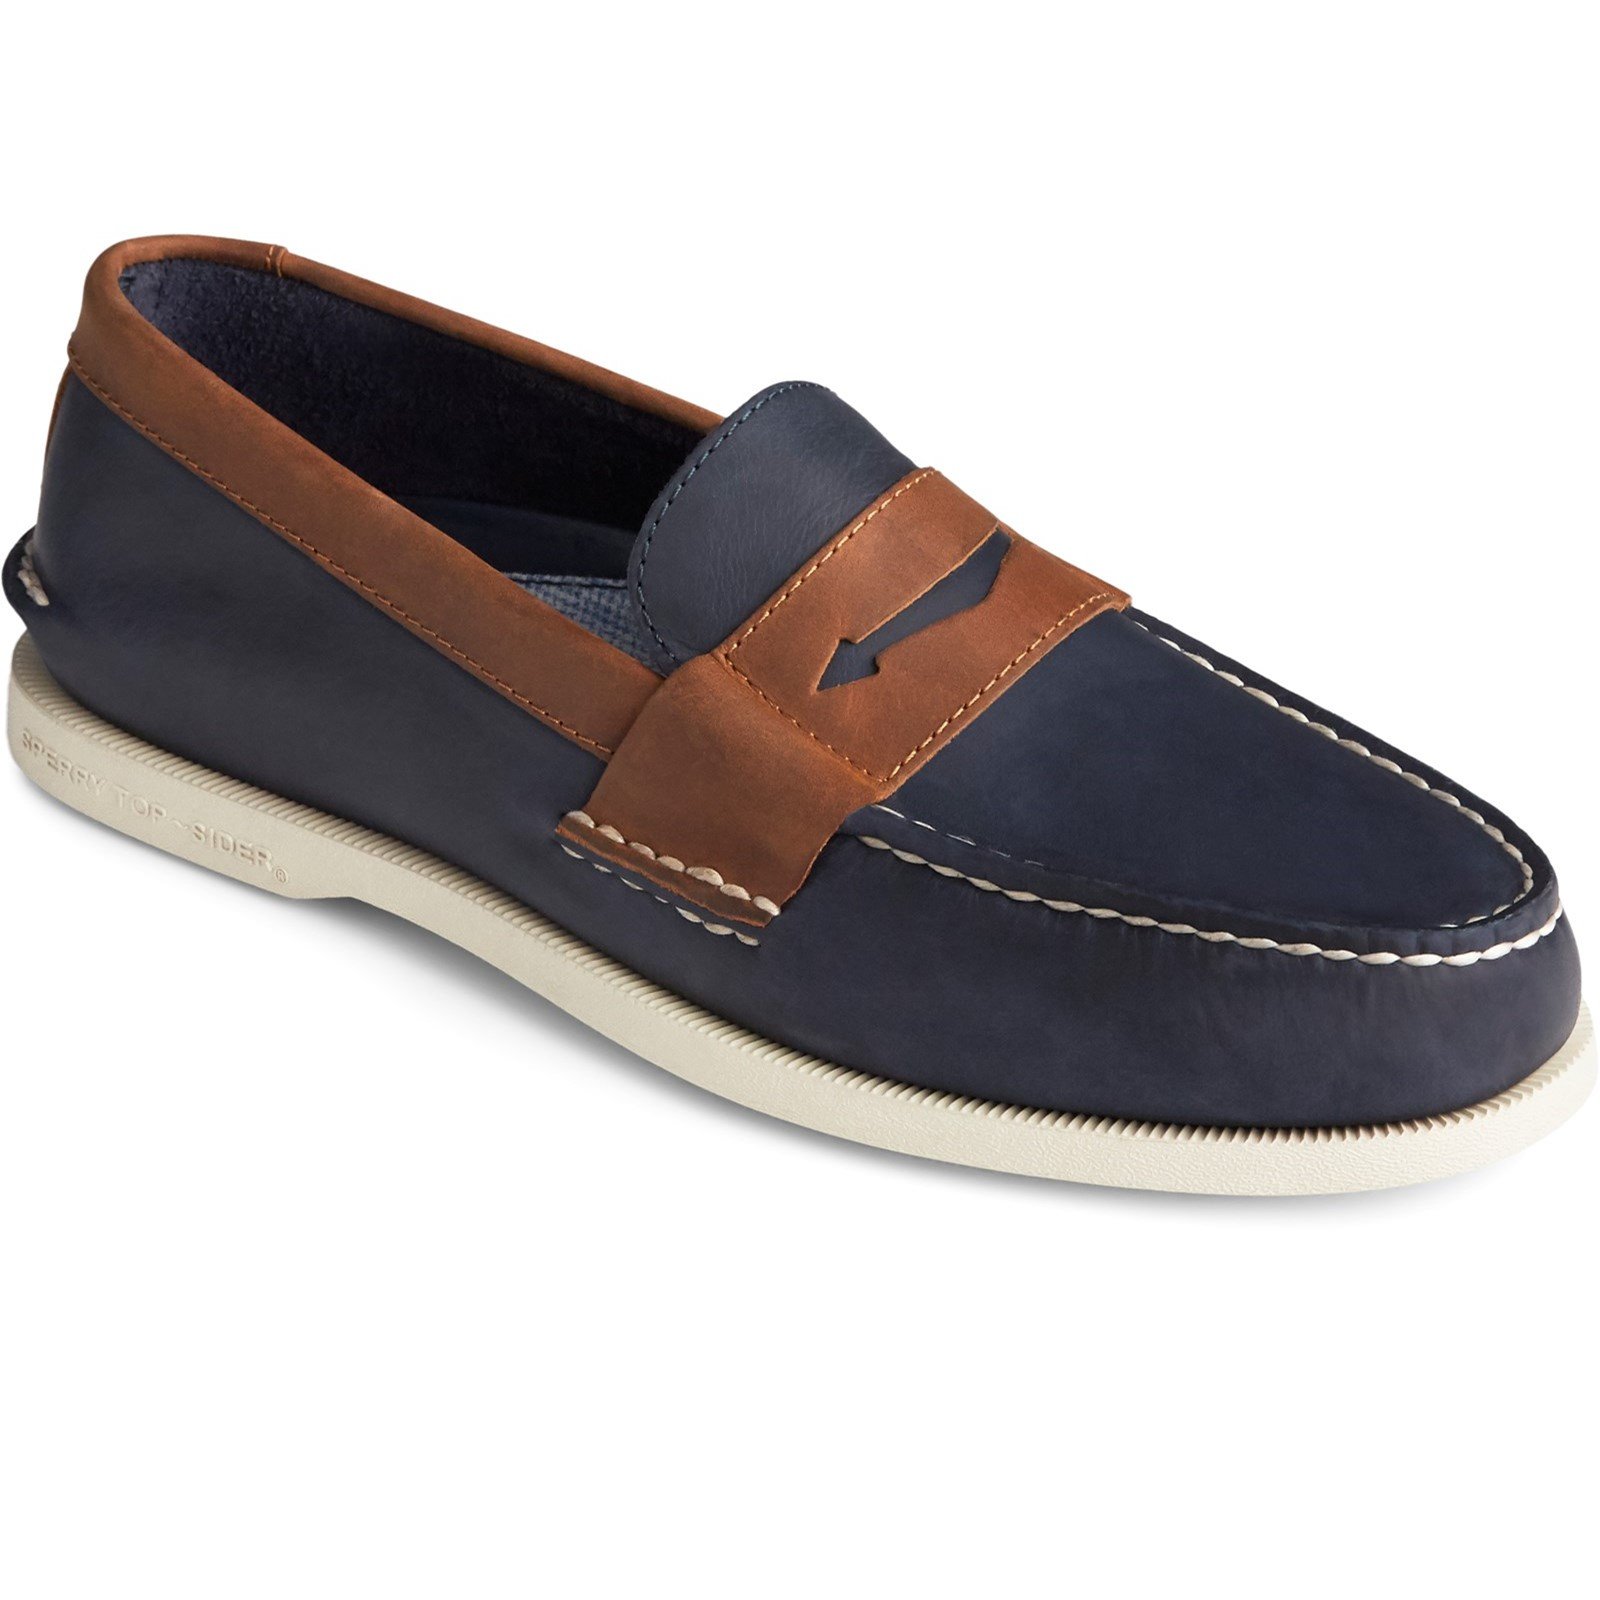 Sperry Men's Authentic Original Penny Loafer Various Colours 32438 - Navy/Sonora 9